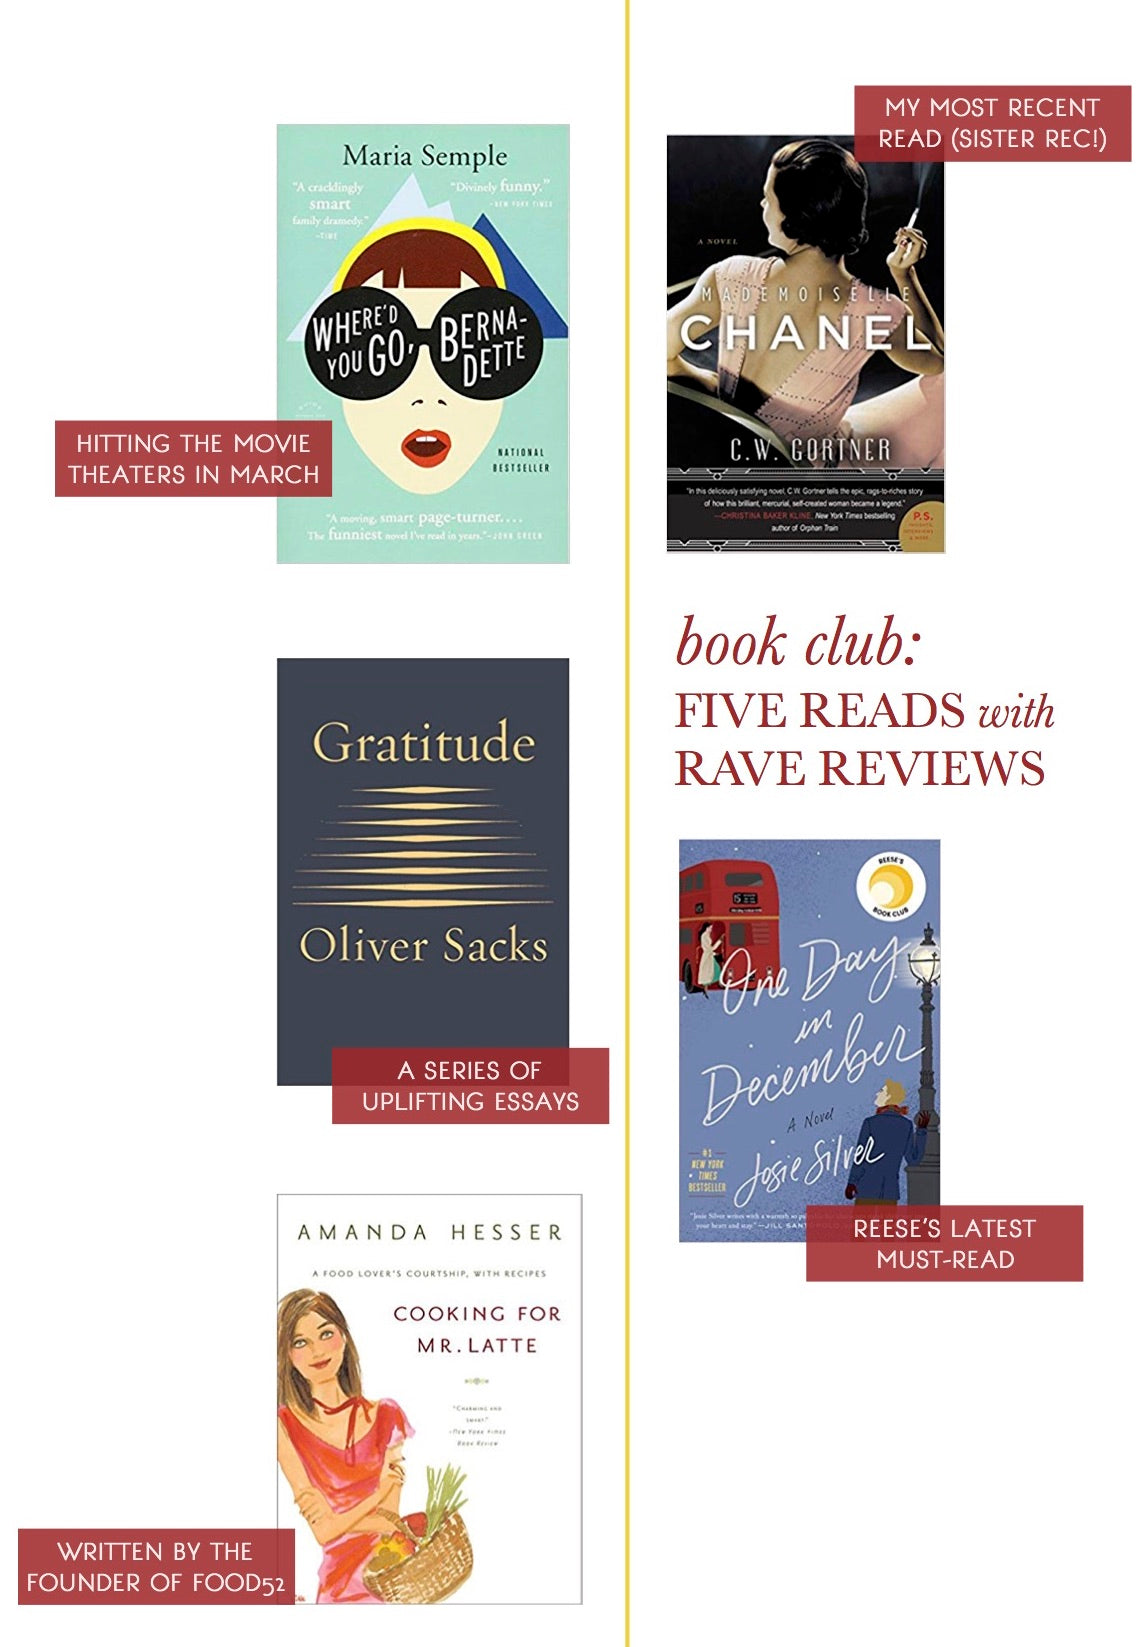 Five Books We're Reading This Year Based on Their Rave Reviews